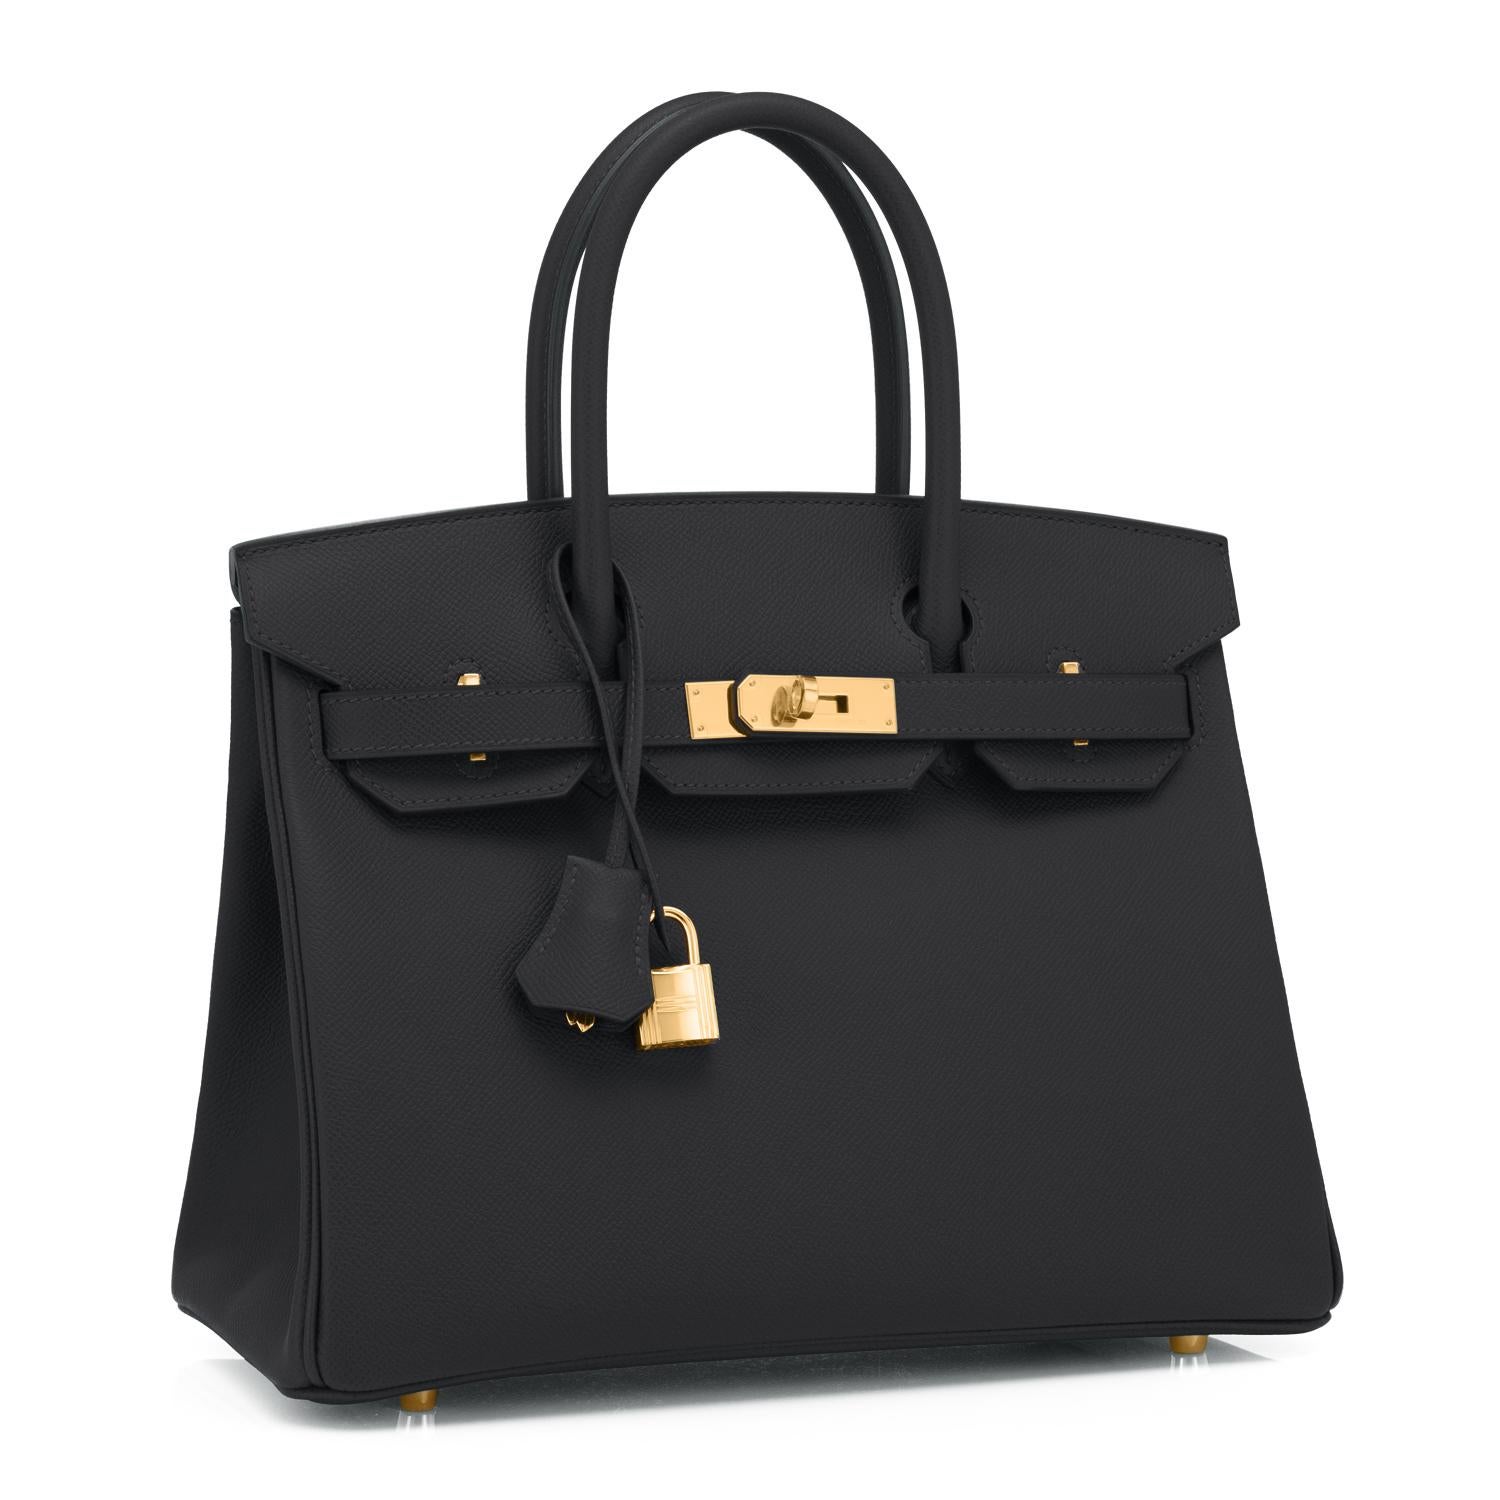 Hermes Birkin 30cm Black Epsom Gold Hardware Bag Z Stamp, 2021
Just purchased from Hermes store; bag bears new interior 2021 Z Stamp.
Brand New in Box. Store fresh.  Pristine Condition (with plastic on hardware)
Perfect gift! Comes with keys, lock,